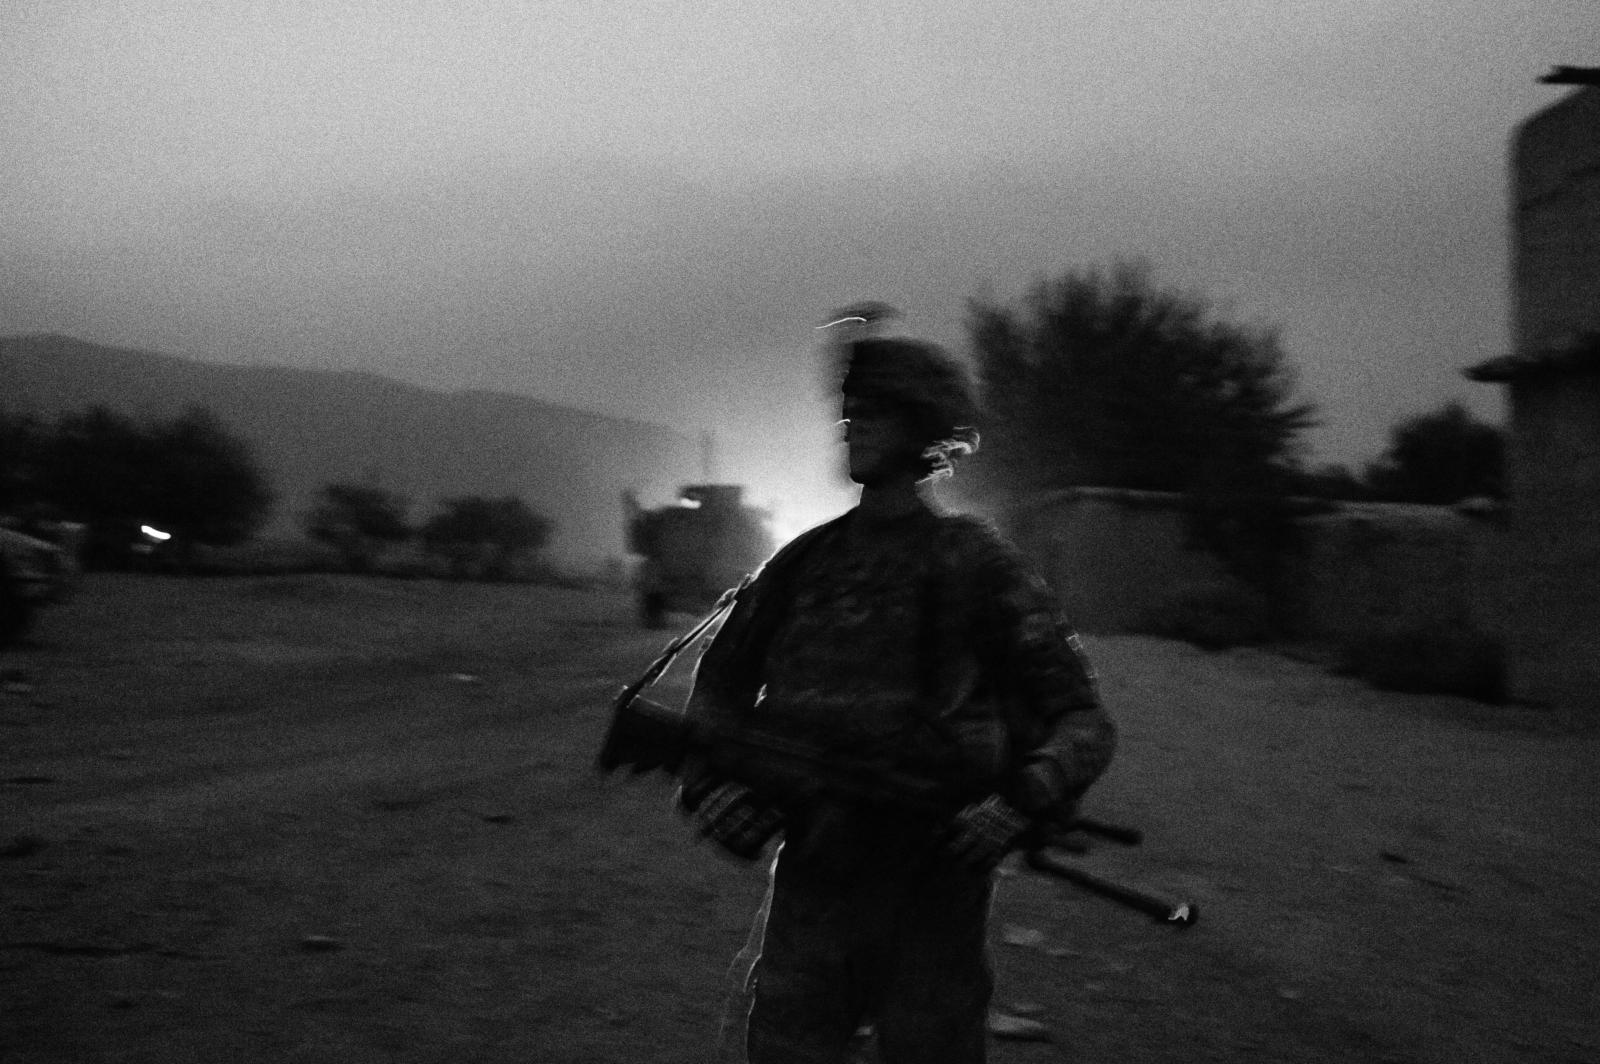 A member of the team Apache of ...Kalay in Sabari, Khost province